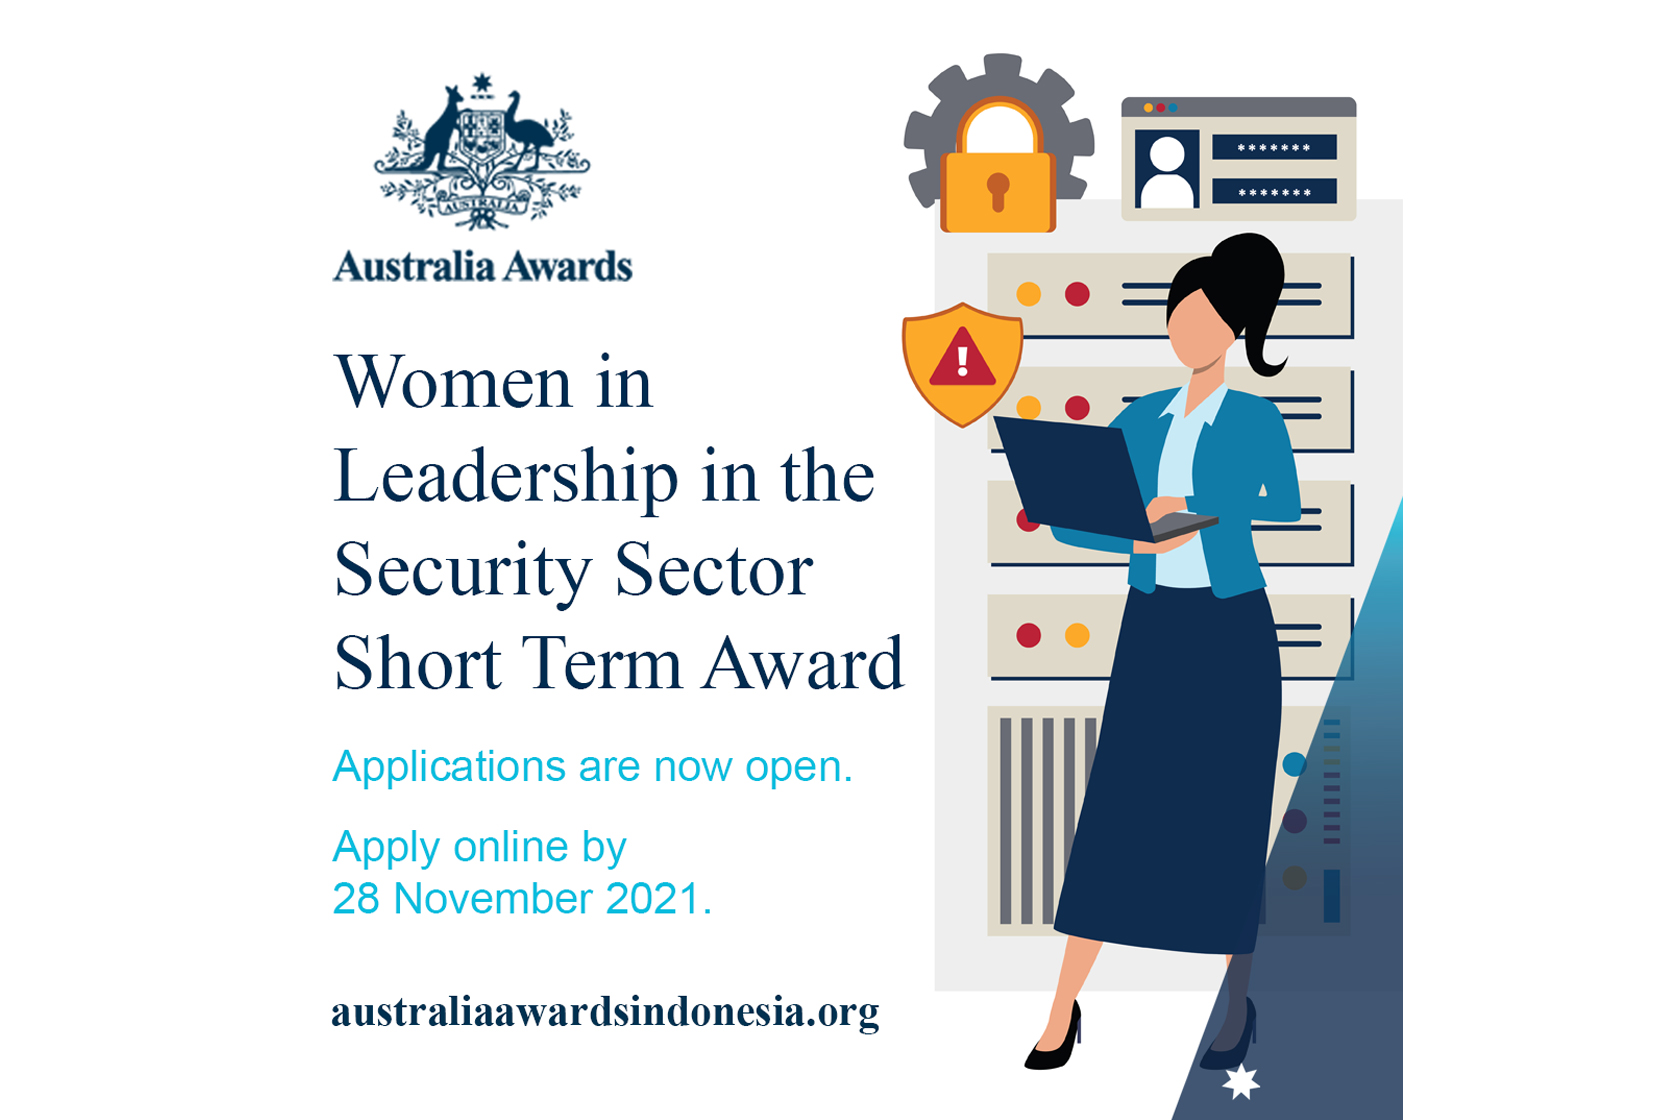 Applications Open for “the Women in Leadership in the Security Sector” Short Term Award